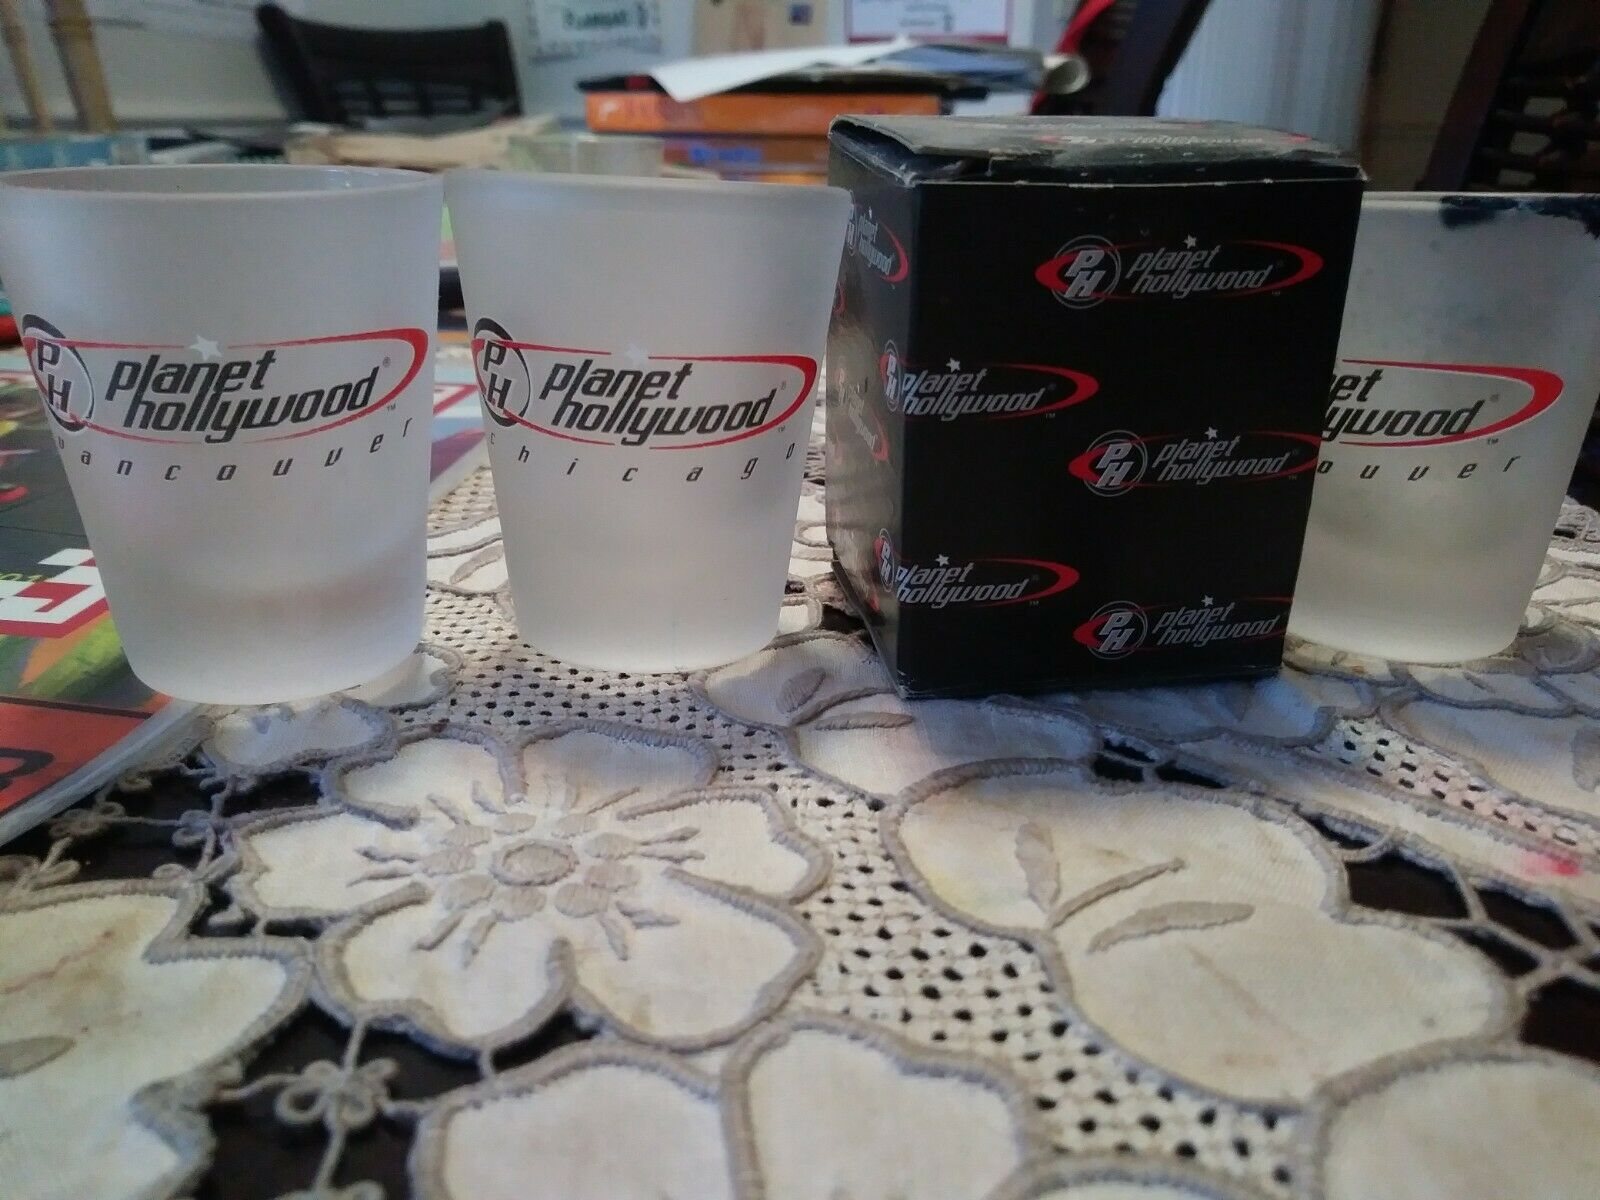 Planet Hollywood Vancouver Canada Chicago Illinois Frosted Shot Glasses & Box